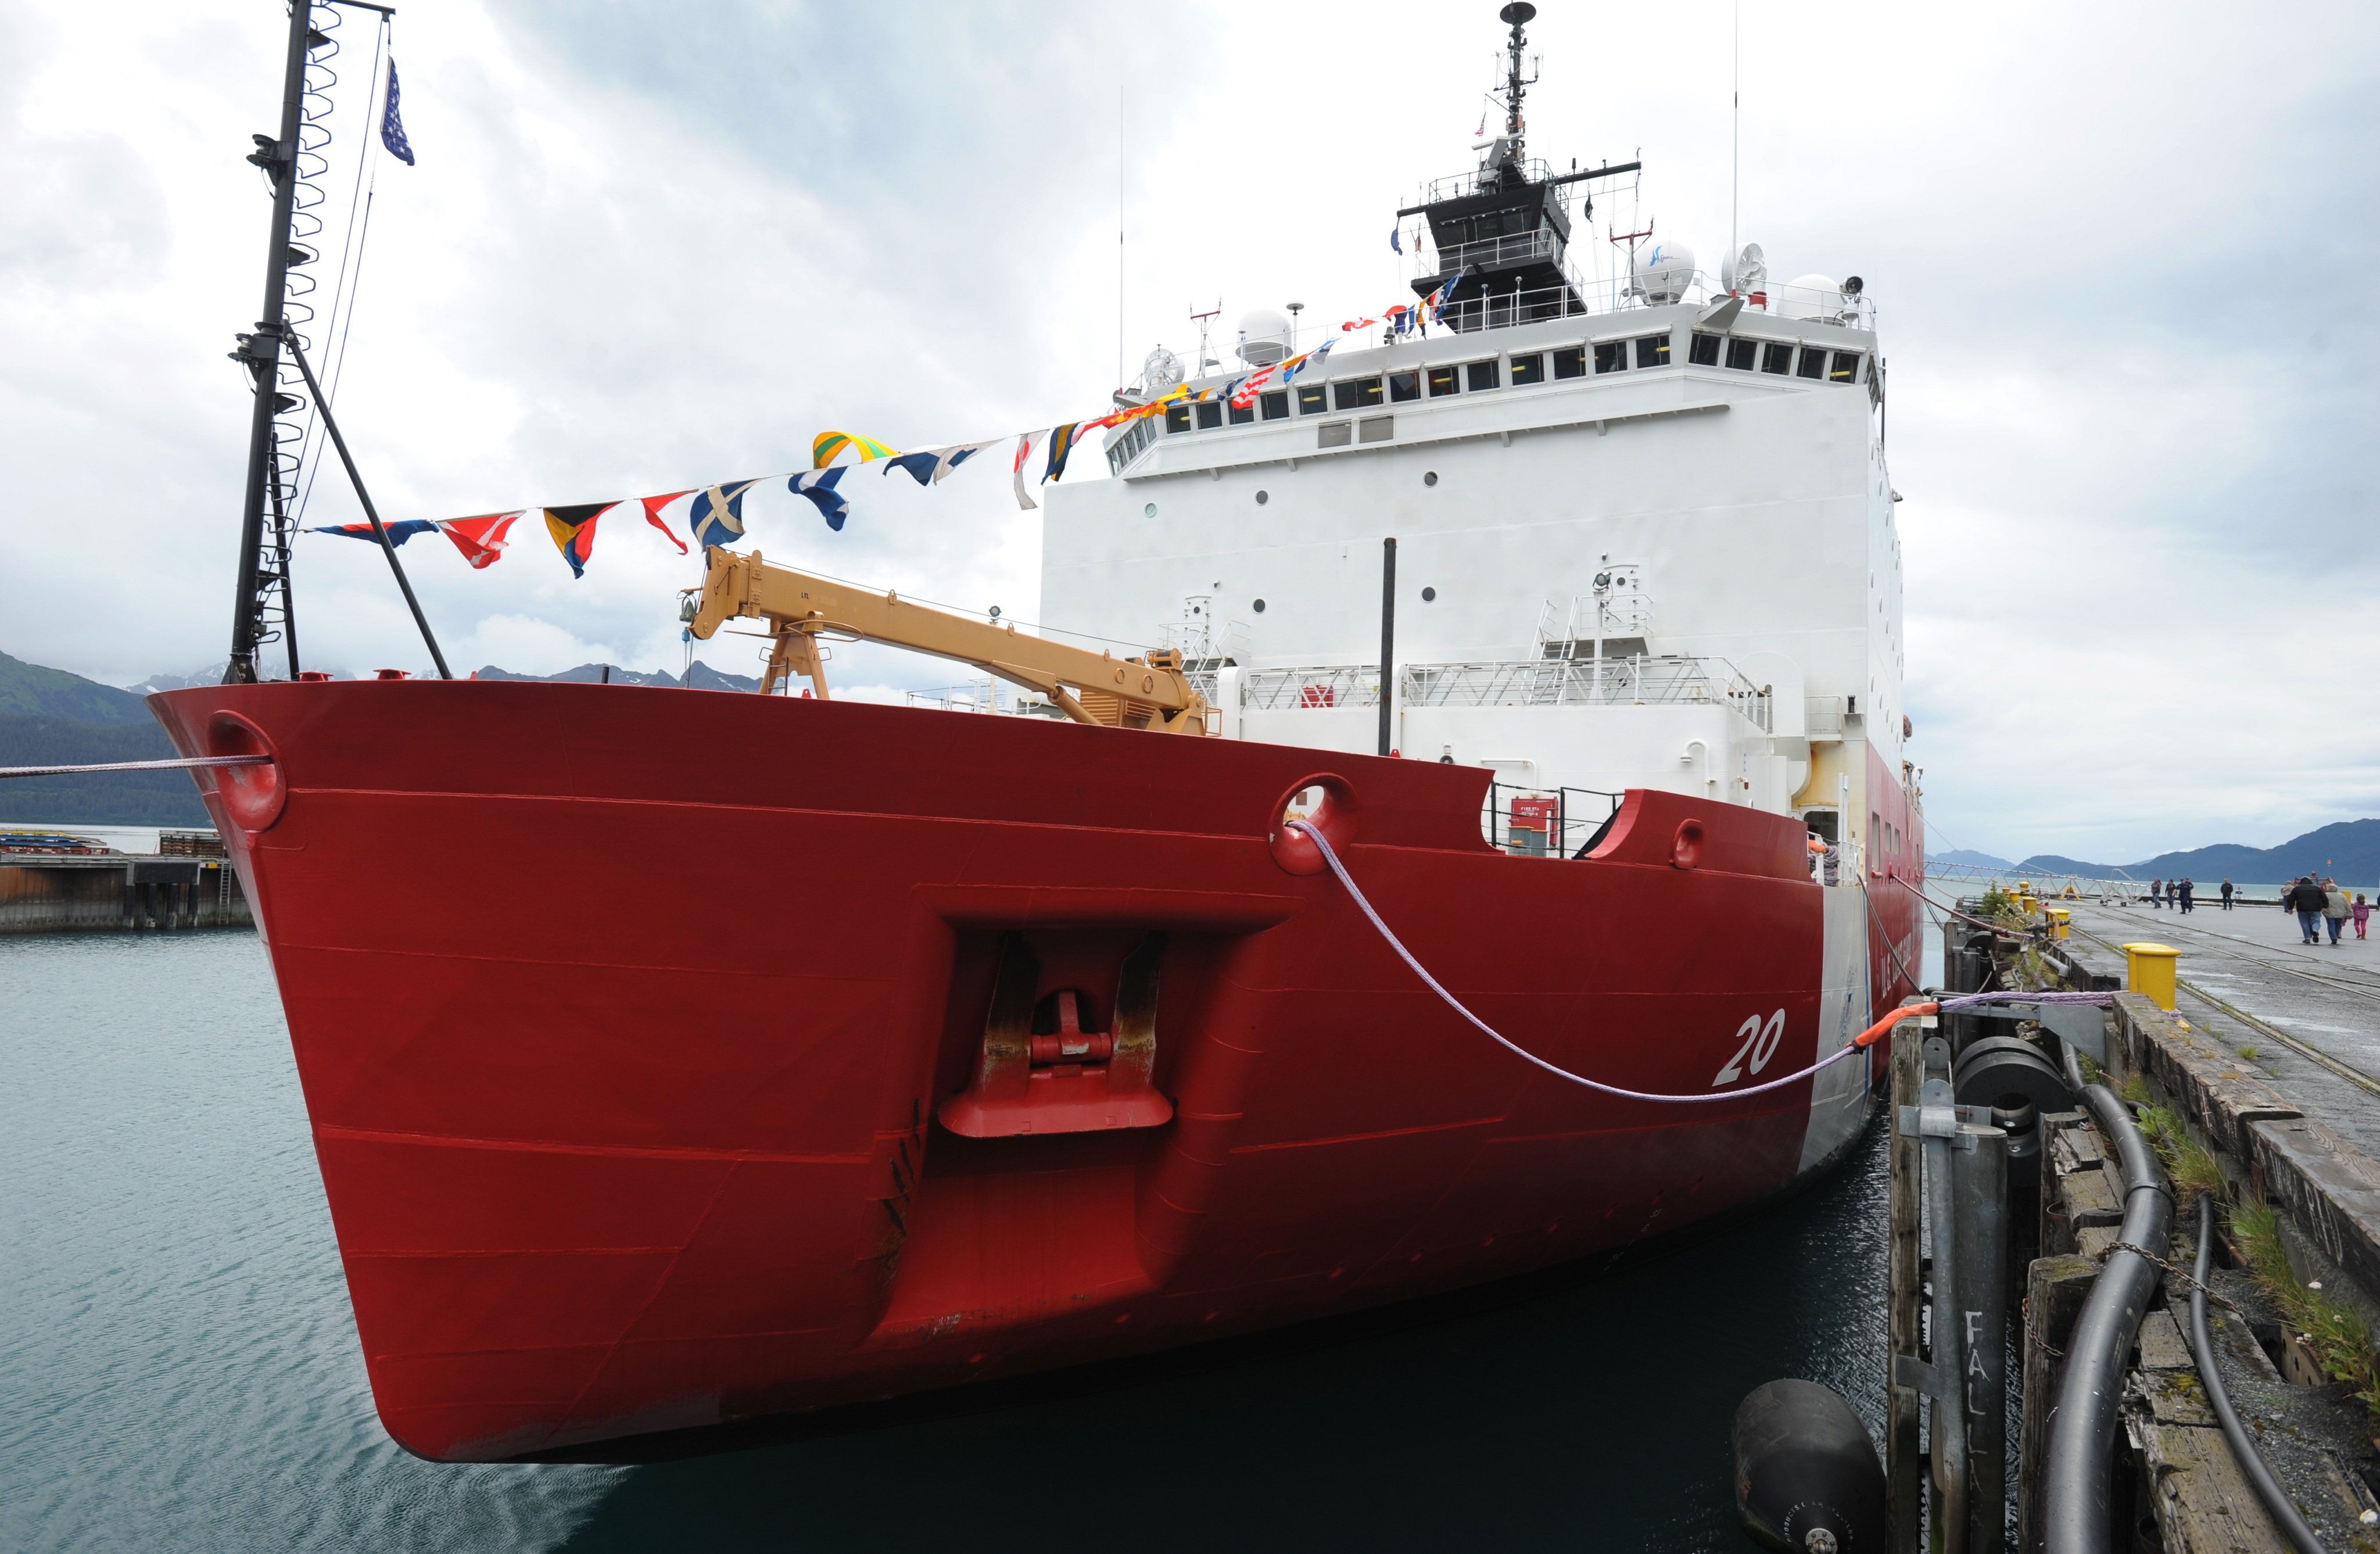 The U.S. Coast Guard Cutter Healy, a 420-foot icebreaker and scientific research vessel based in Seattle, was open for public tours while moored in Seward as the Coast Guard celebrated its 224th birthday on Monday, August 4, 2014. (Bill Roth / Alaska Dispatch News file photo)